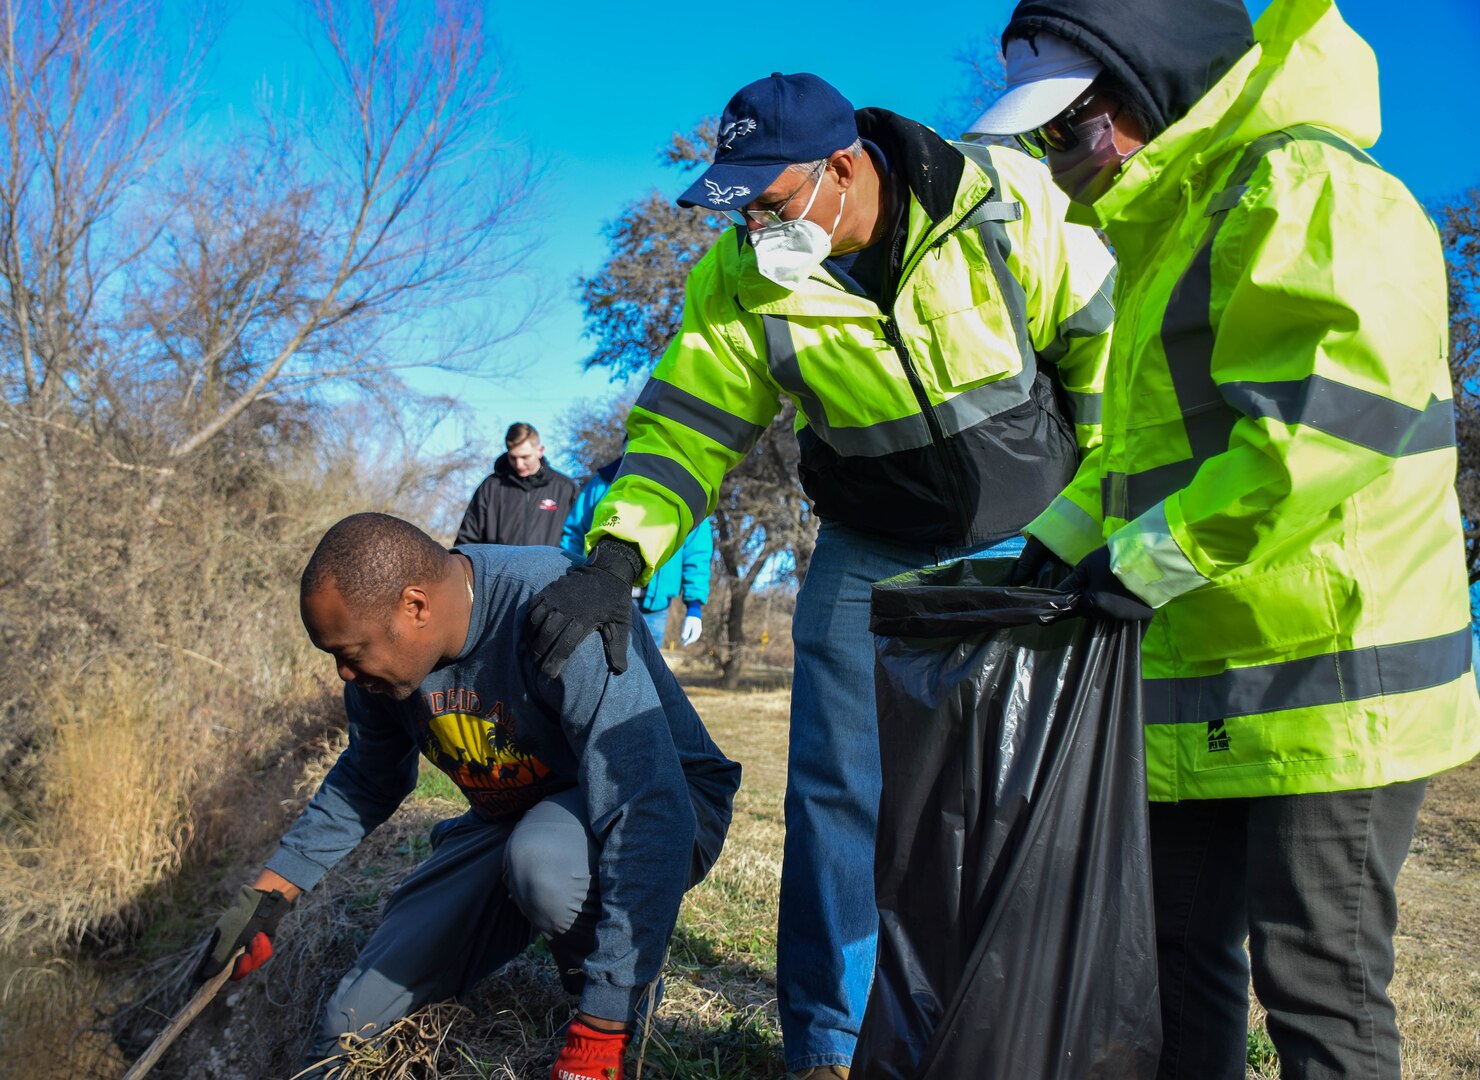 Master Sgt. Bryan Boyd, 733rd Training Squadron military training leader, removes trash from Leon Creek at Stillman Park with the assistance of Amilkar Crompton and Maya Bernstein, 502nd Logistics Readiness Squadron motor vehicle operators, at Joint Base San Antonio-Lackland, Texas, Feb. 18, 2022. The cleanup was a joint initiative coordinated by the 502nd Installation Support Group to remove garbage and debris from on-base parks and waterways. (U.S. Air Force photo by Airman Mark Colmenares)